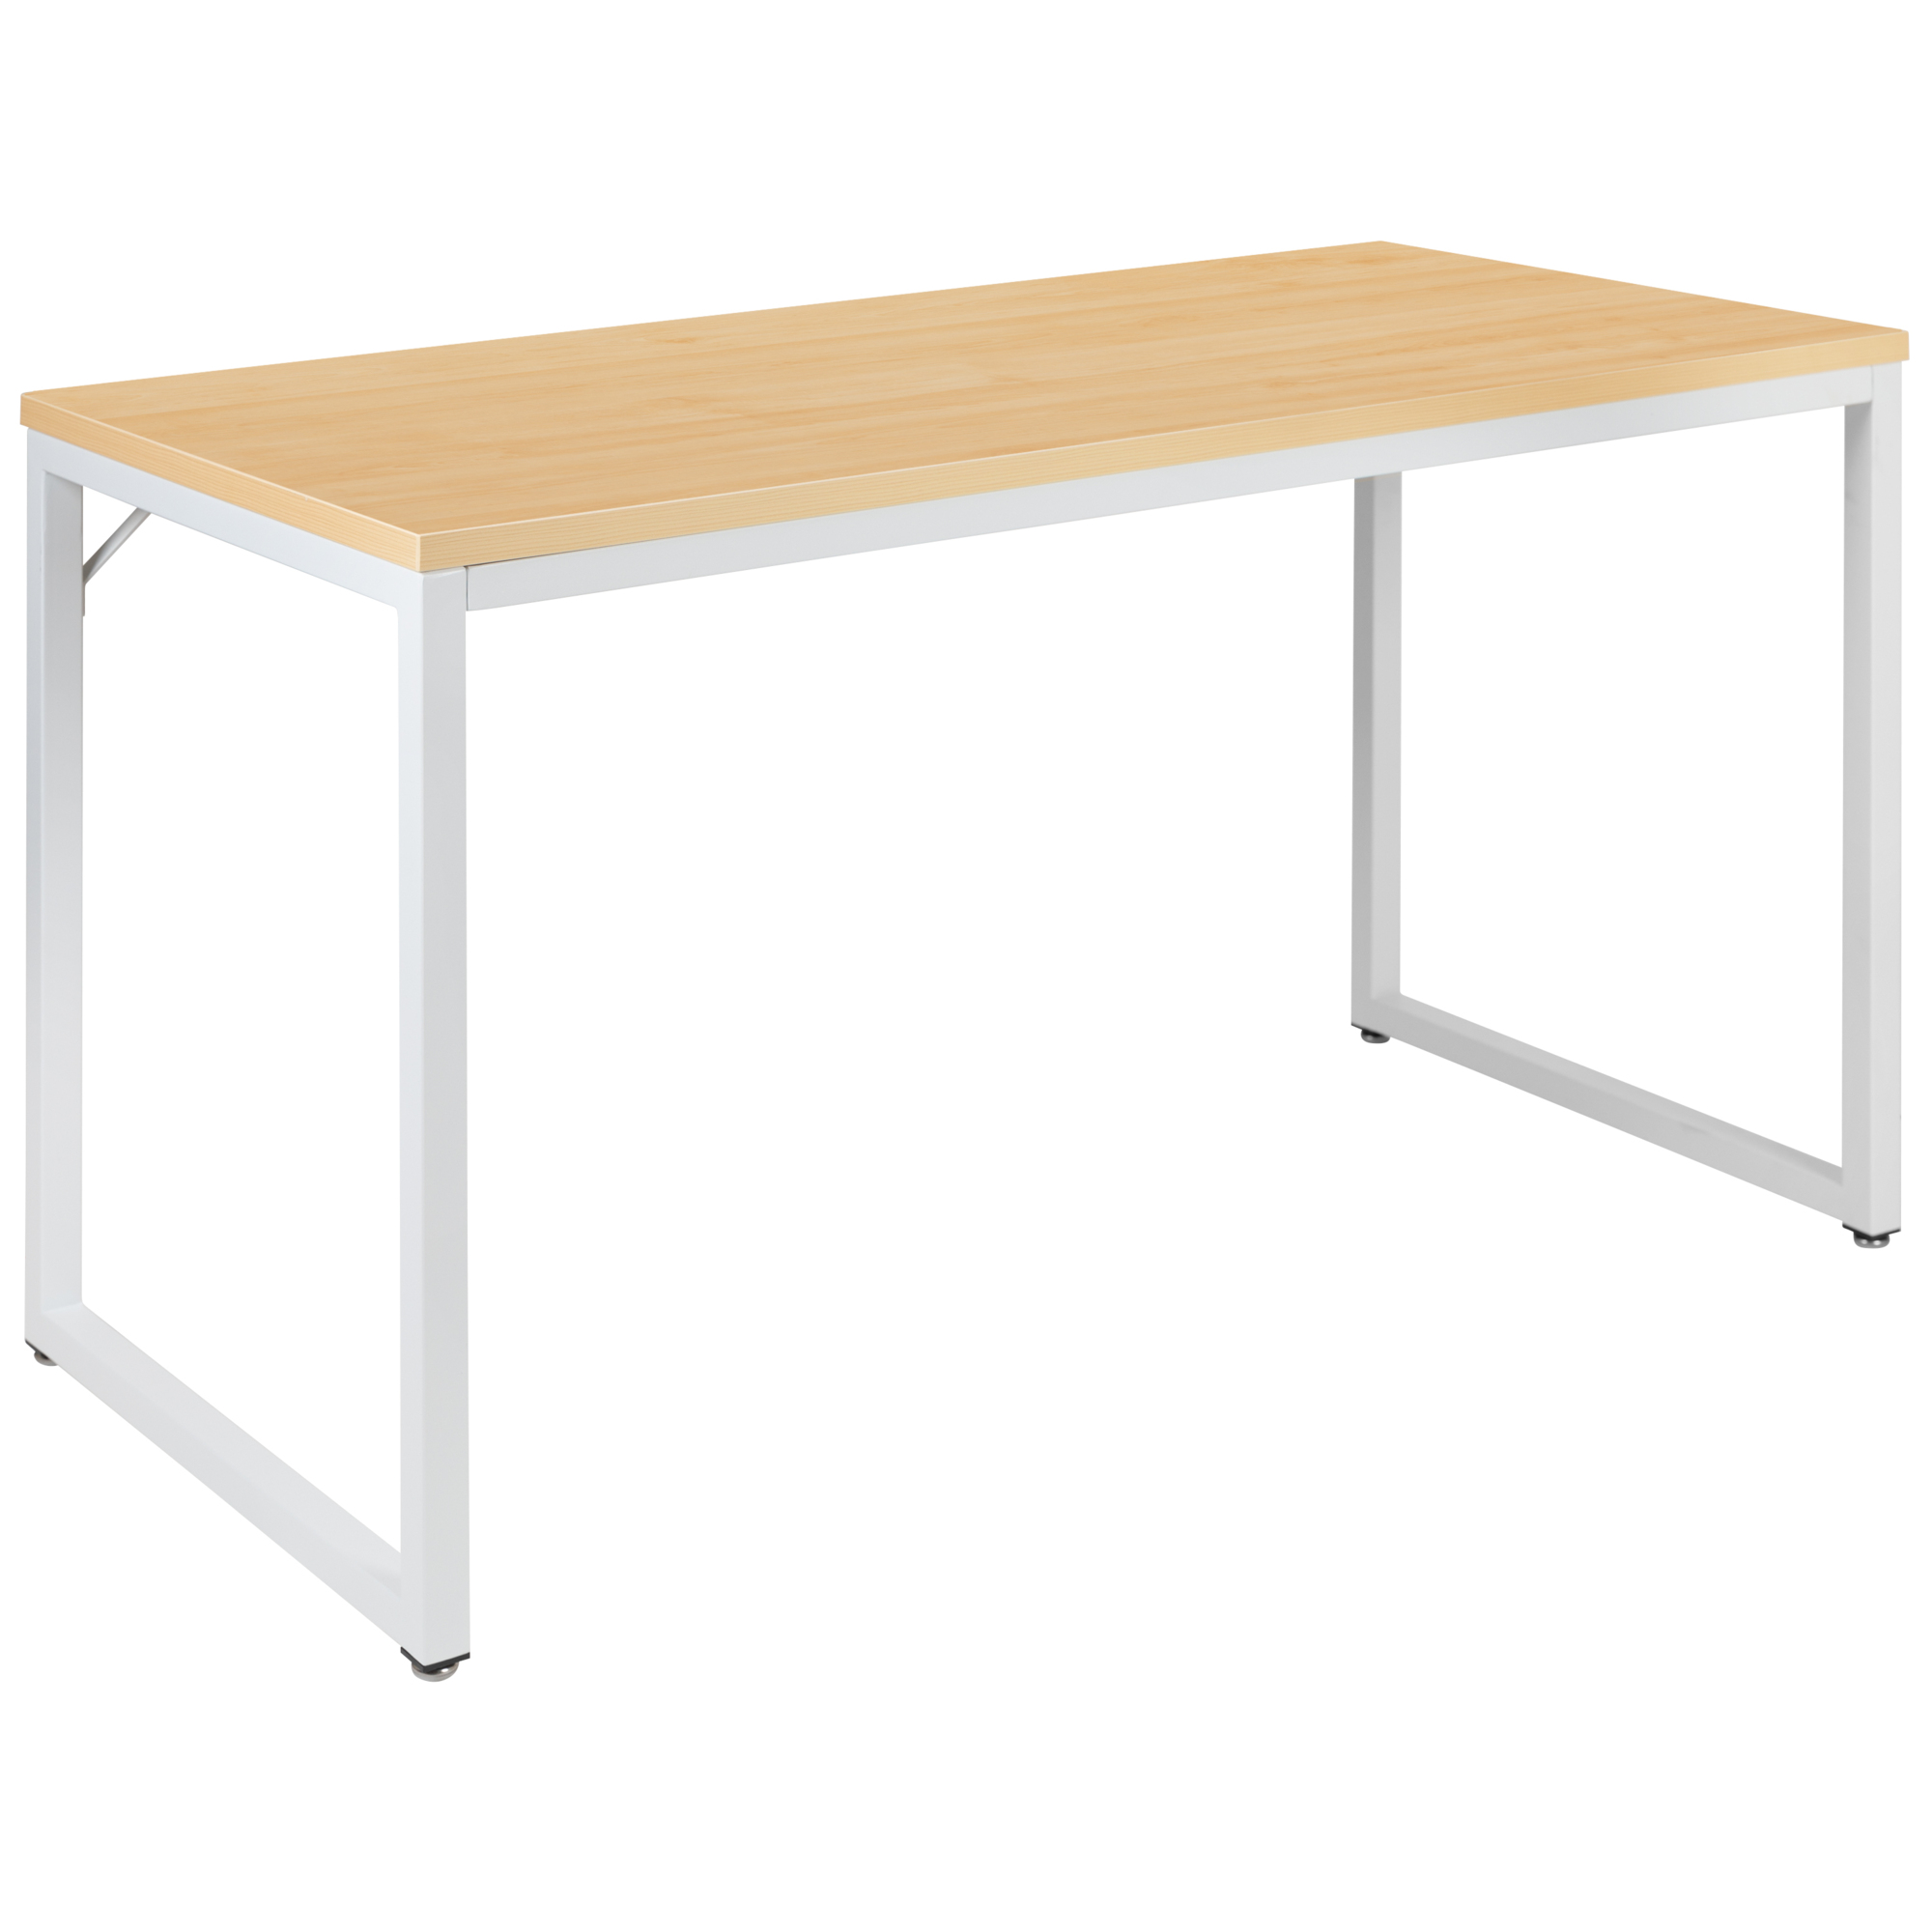 Flash Furniture, 47Inch L Commercial Industrial Office Desk in Maple, Width 47.25 in, Height 29.5 in, Depth 23.5 in, Model GCGF15612MAPWH